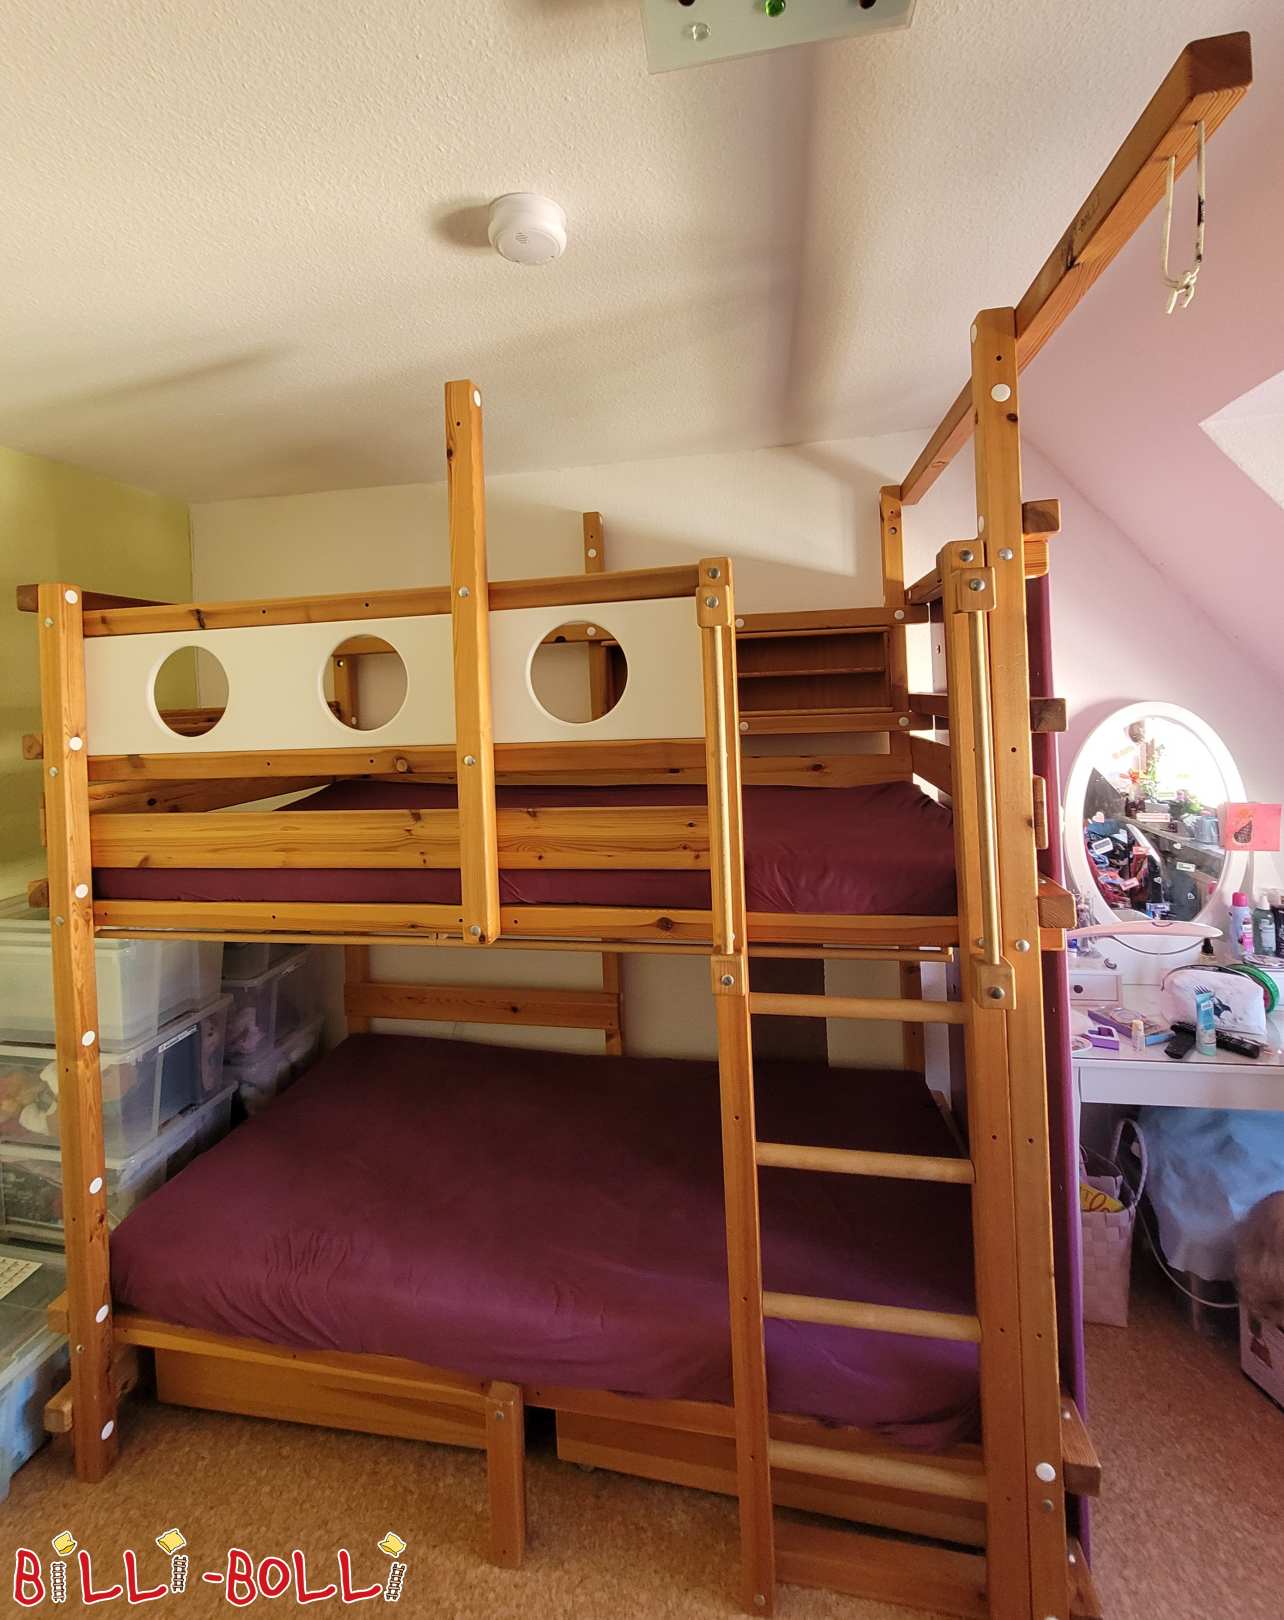 Bunk bed with climbing wall and swing beam (Category: Bunk Bed pre-owned)